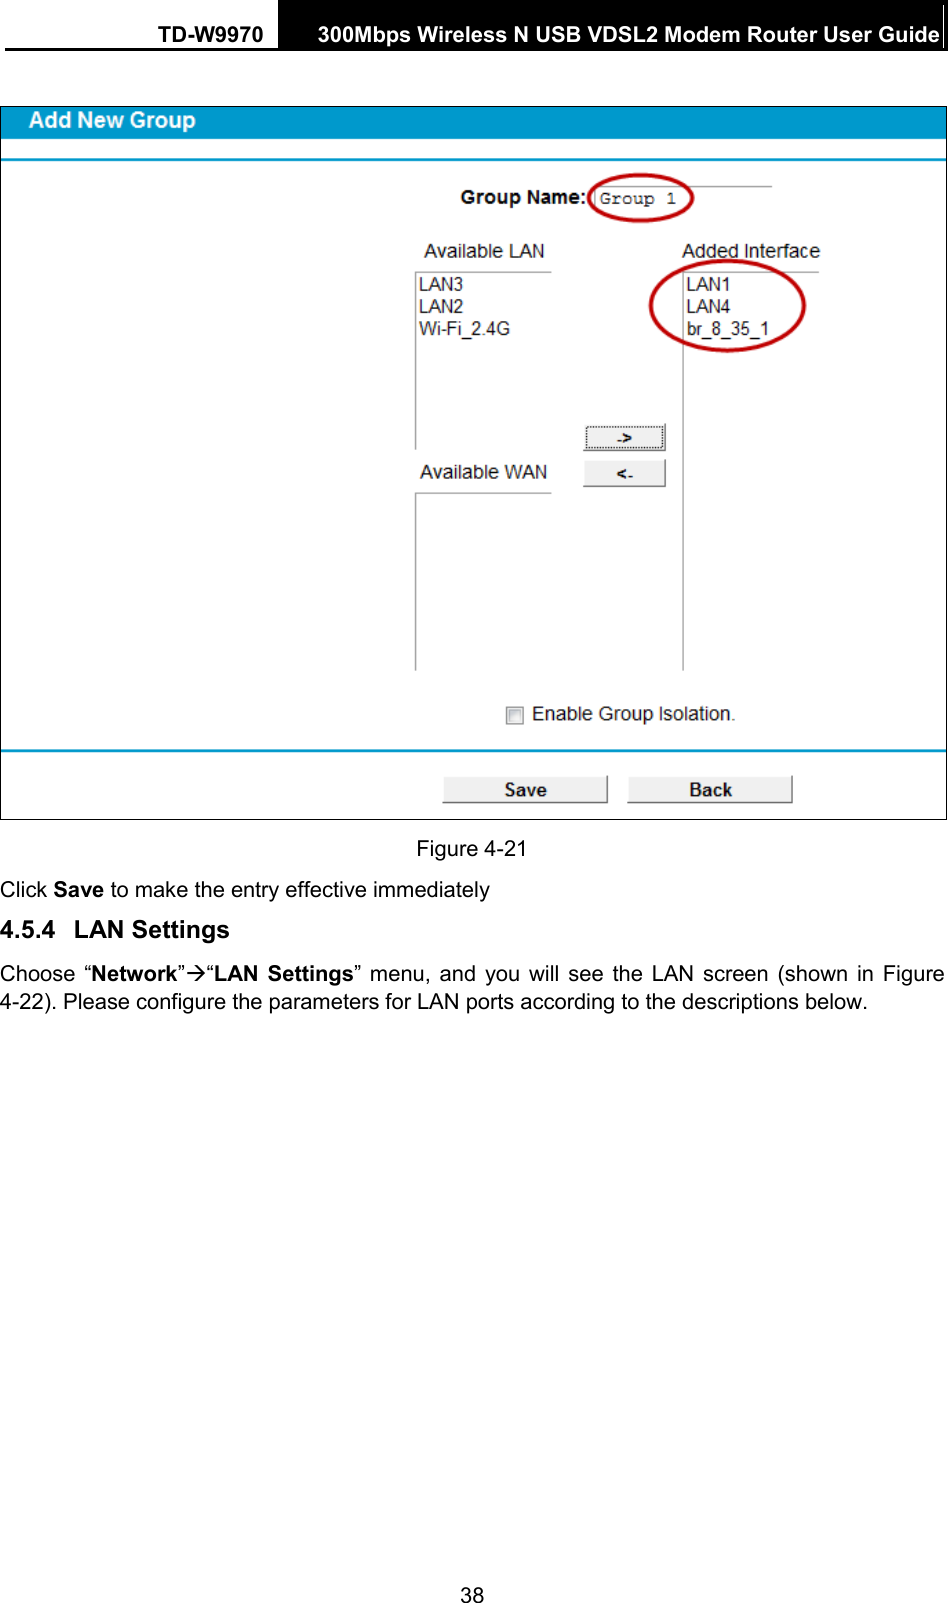 TD-W9970 300Mbps Wireless N USB VDSL2 Modem Router User Guide    Figure 4-21 Click Save to make the entry effective immediately 4.5.4 LAN Settings Choose “Network”“LAN Settings”  menu, and you will see the LAN screen (shown in Figure 4-22). Please configure the parameters for LAN ports according to the descriptions below.  38 